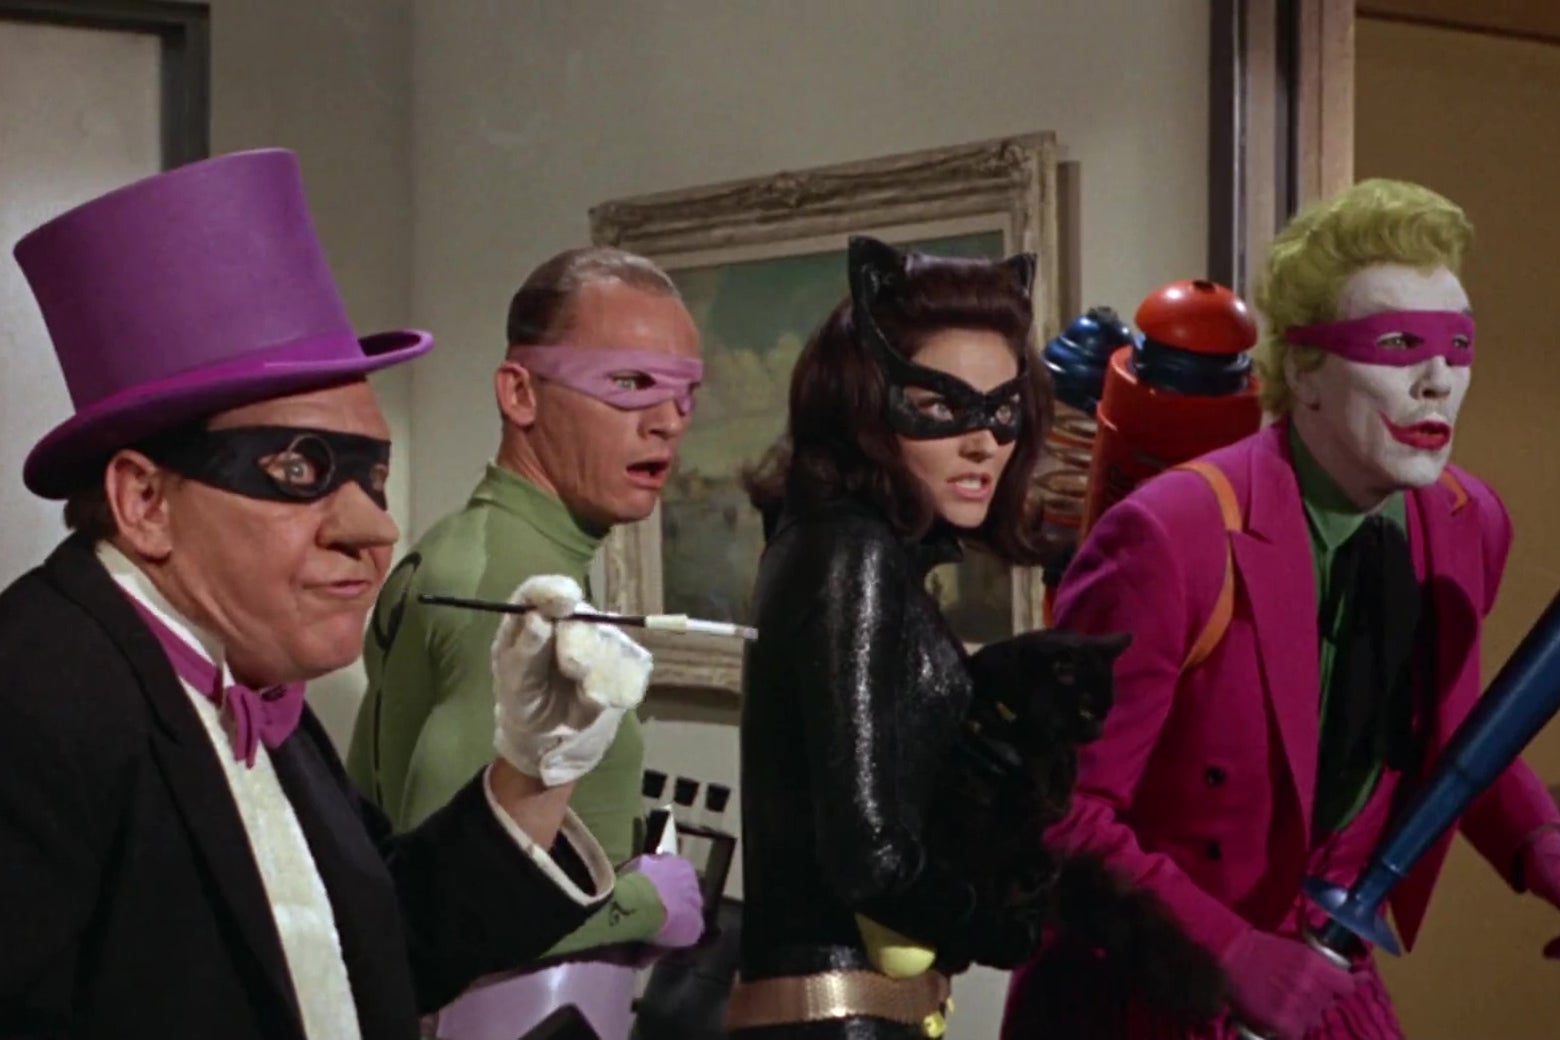 The Penguin, the Riddler, Catwoman, and the Joker looking shocked in a still from the 1966 Batman movie.